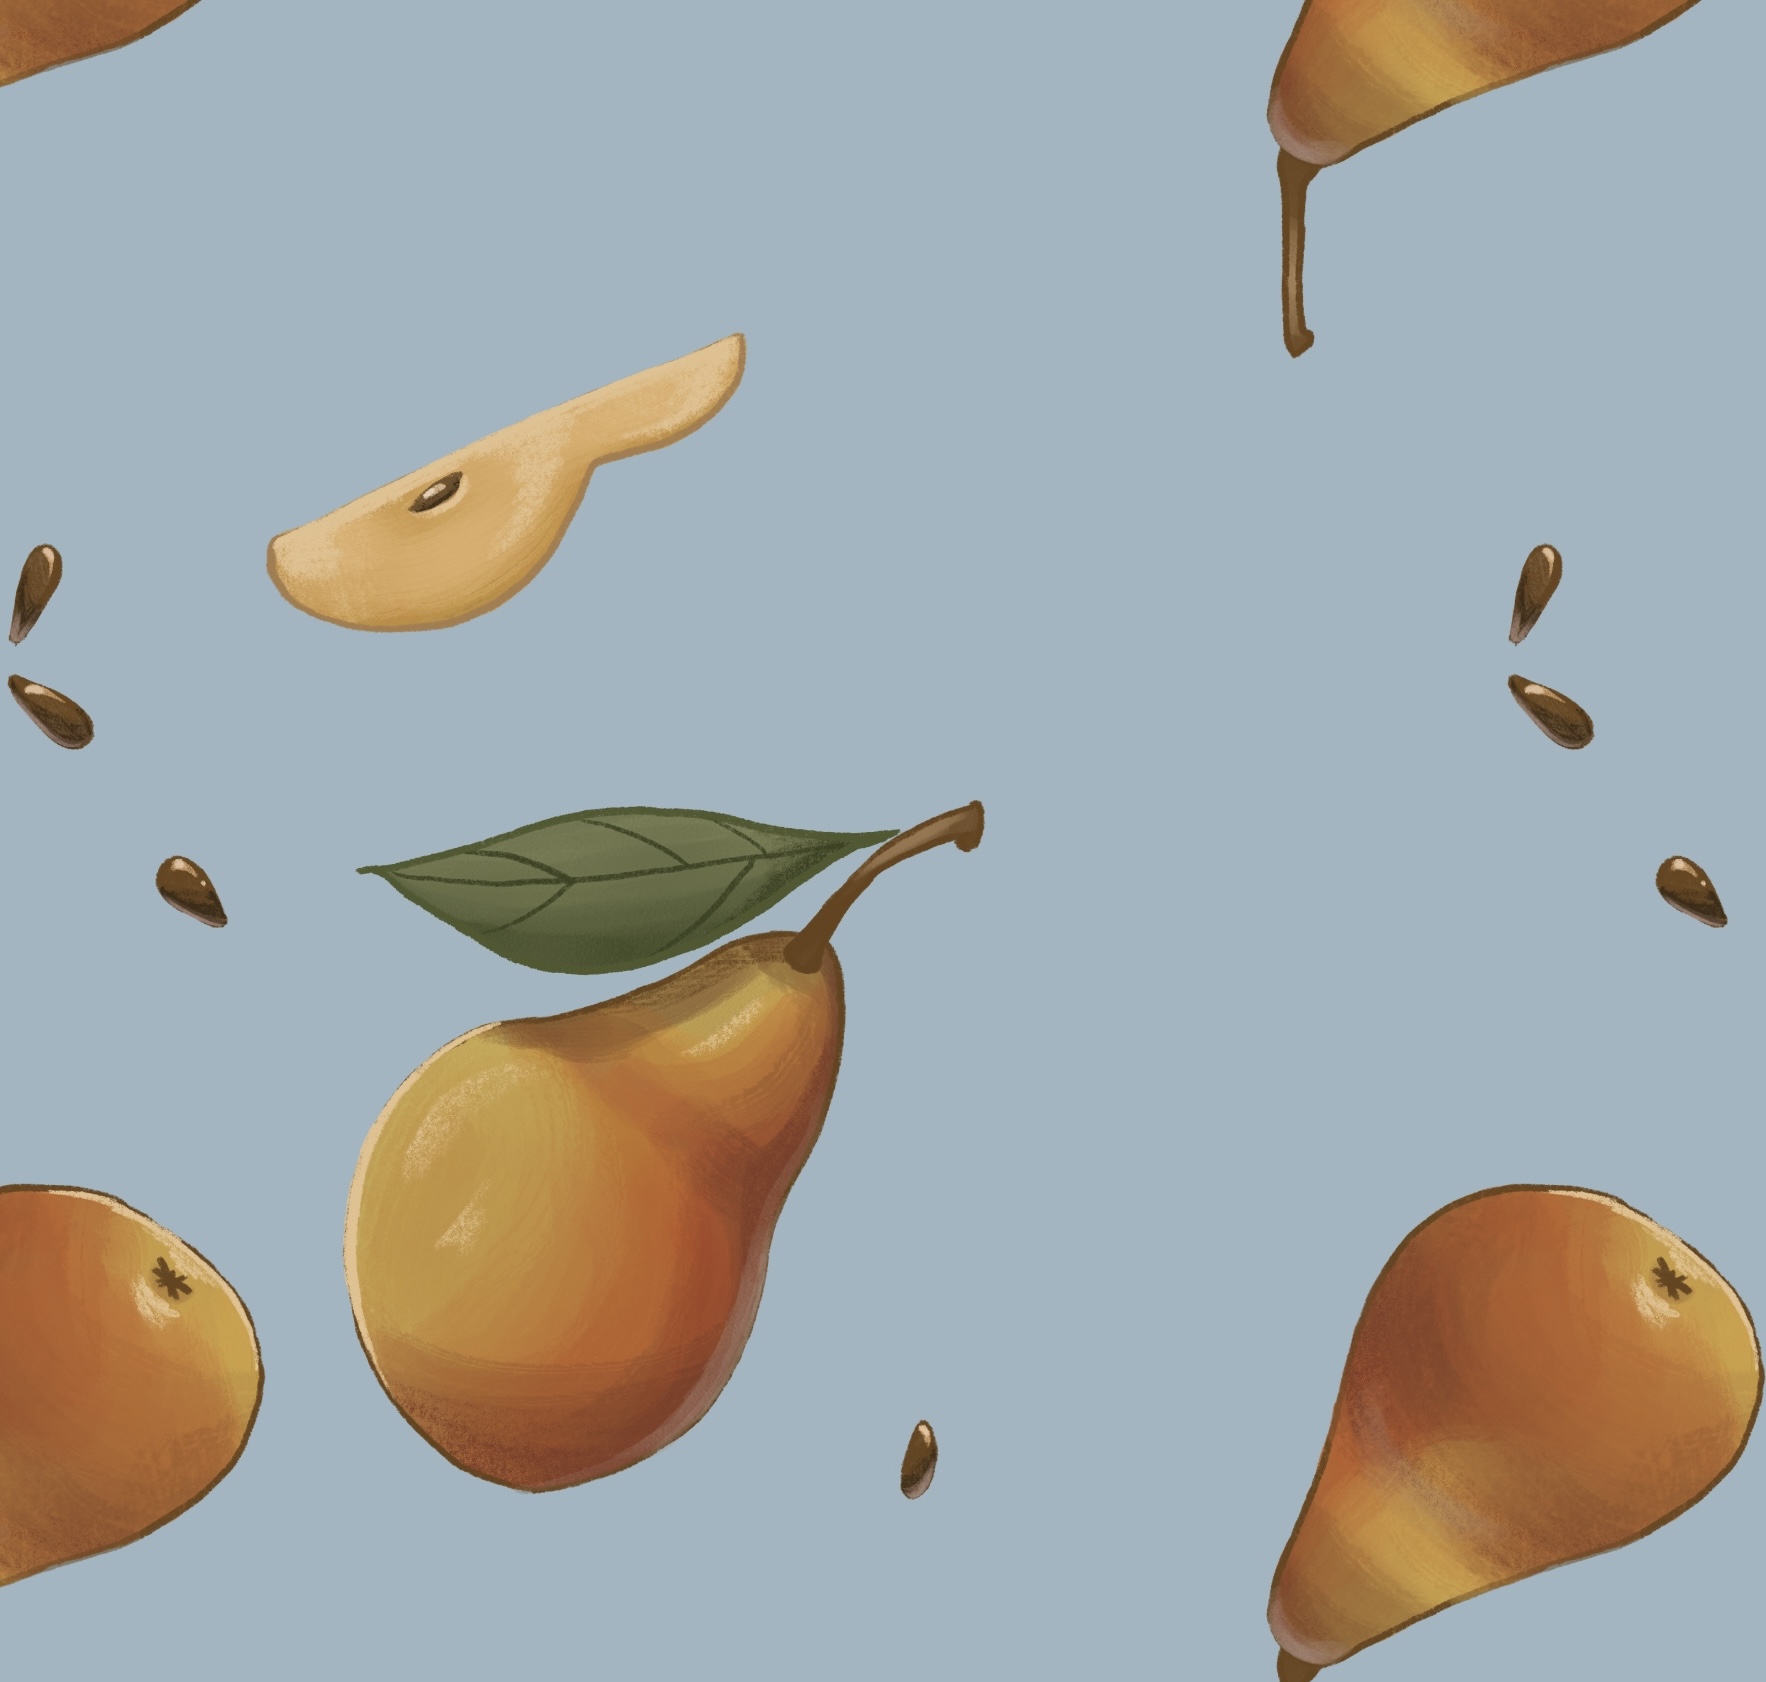 Painting of pears and pear slices with a leaf.